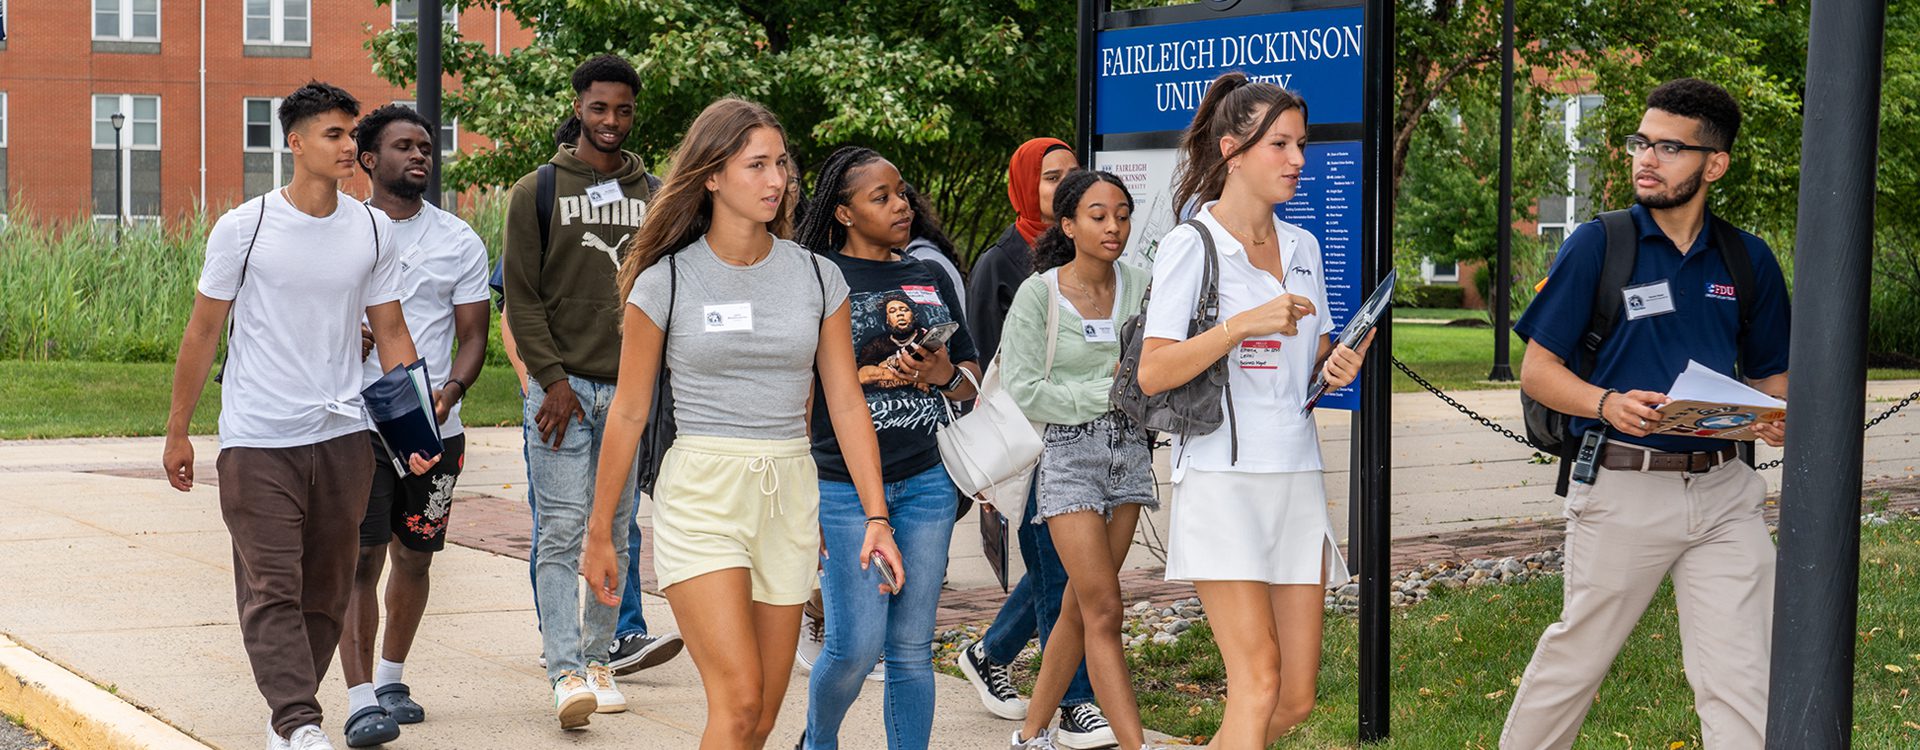 students_walking_on_campus